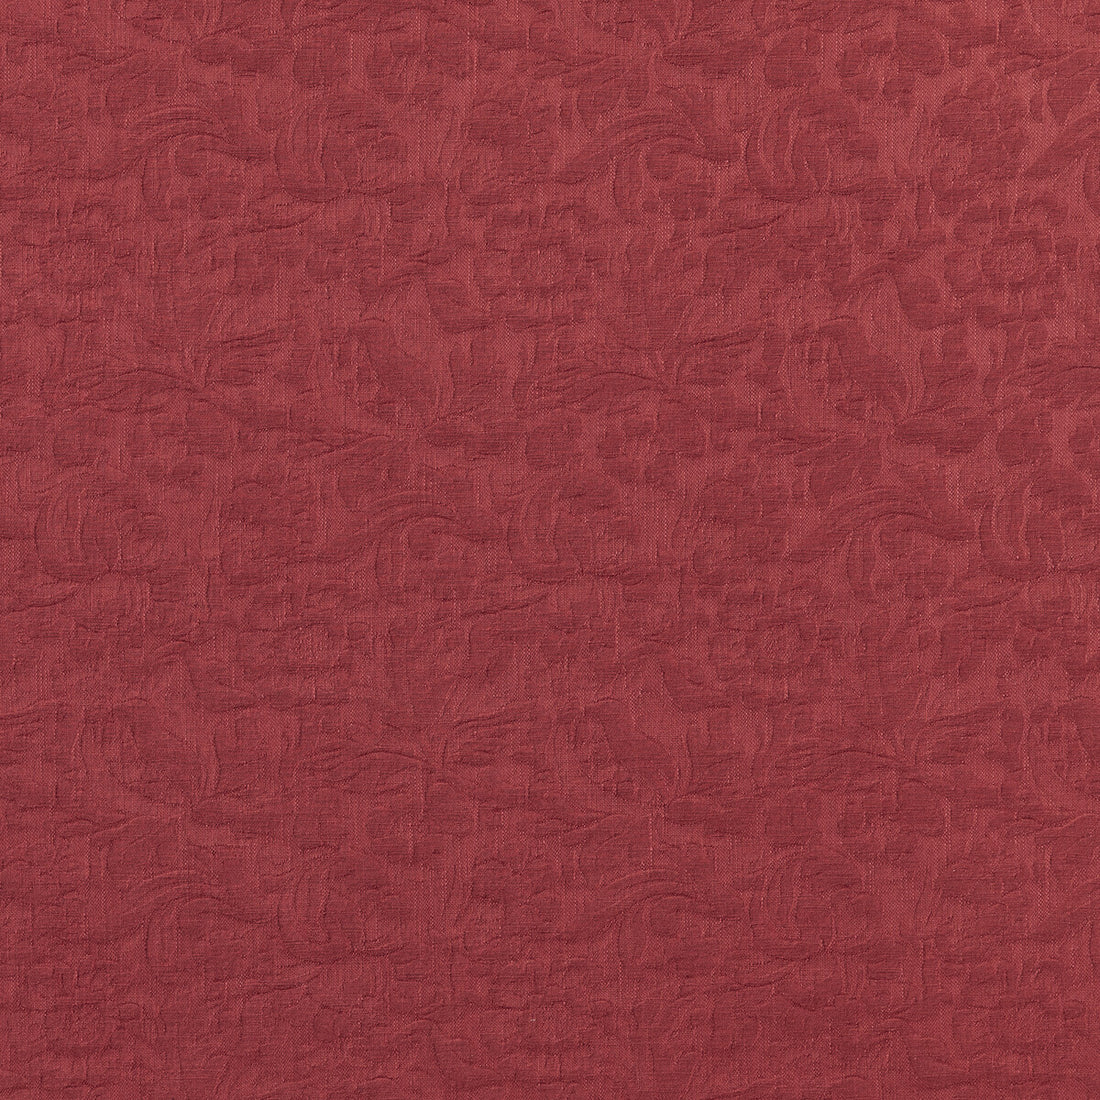 Gambetta Weave fabric in red color - pattern 8019120.19.0 - by Brunschwig &amp; Fils in the Alsace Weaves collection